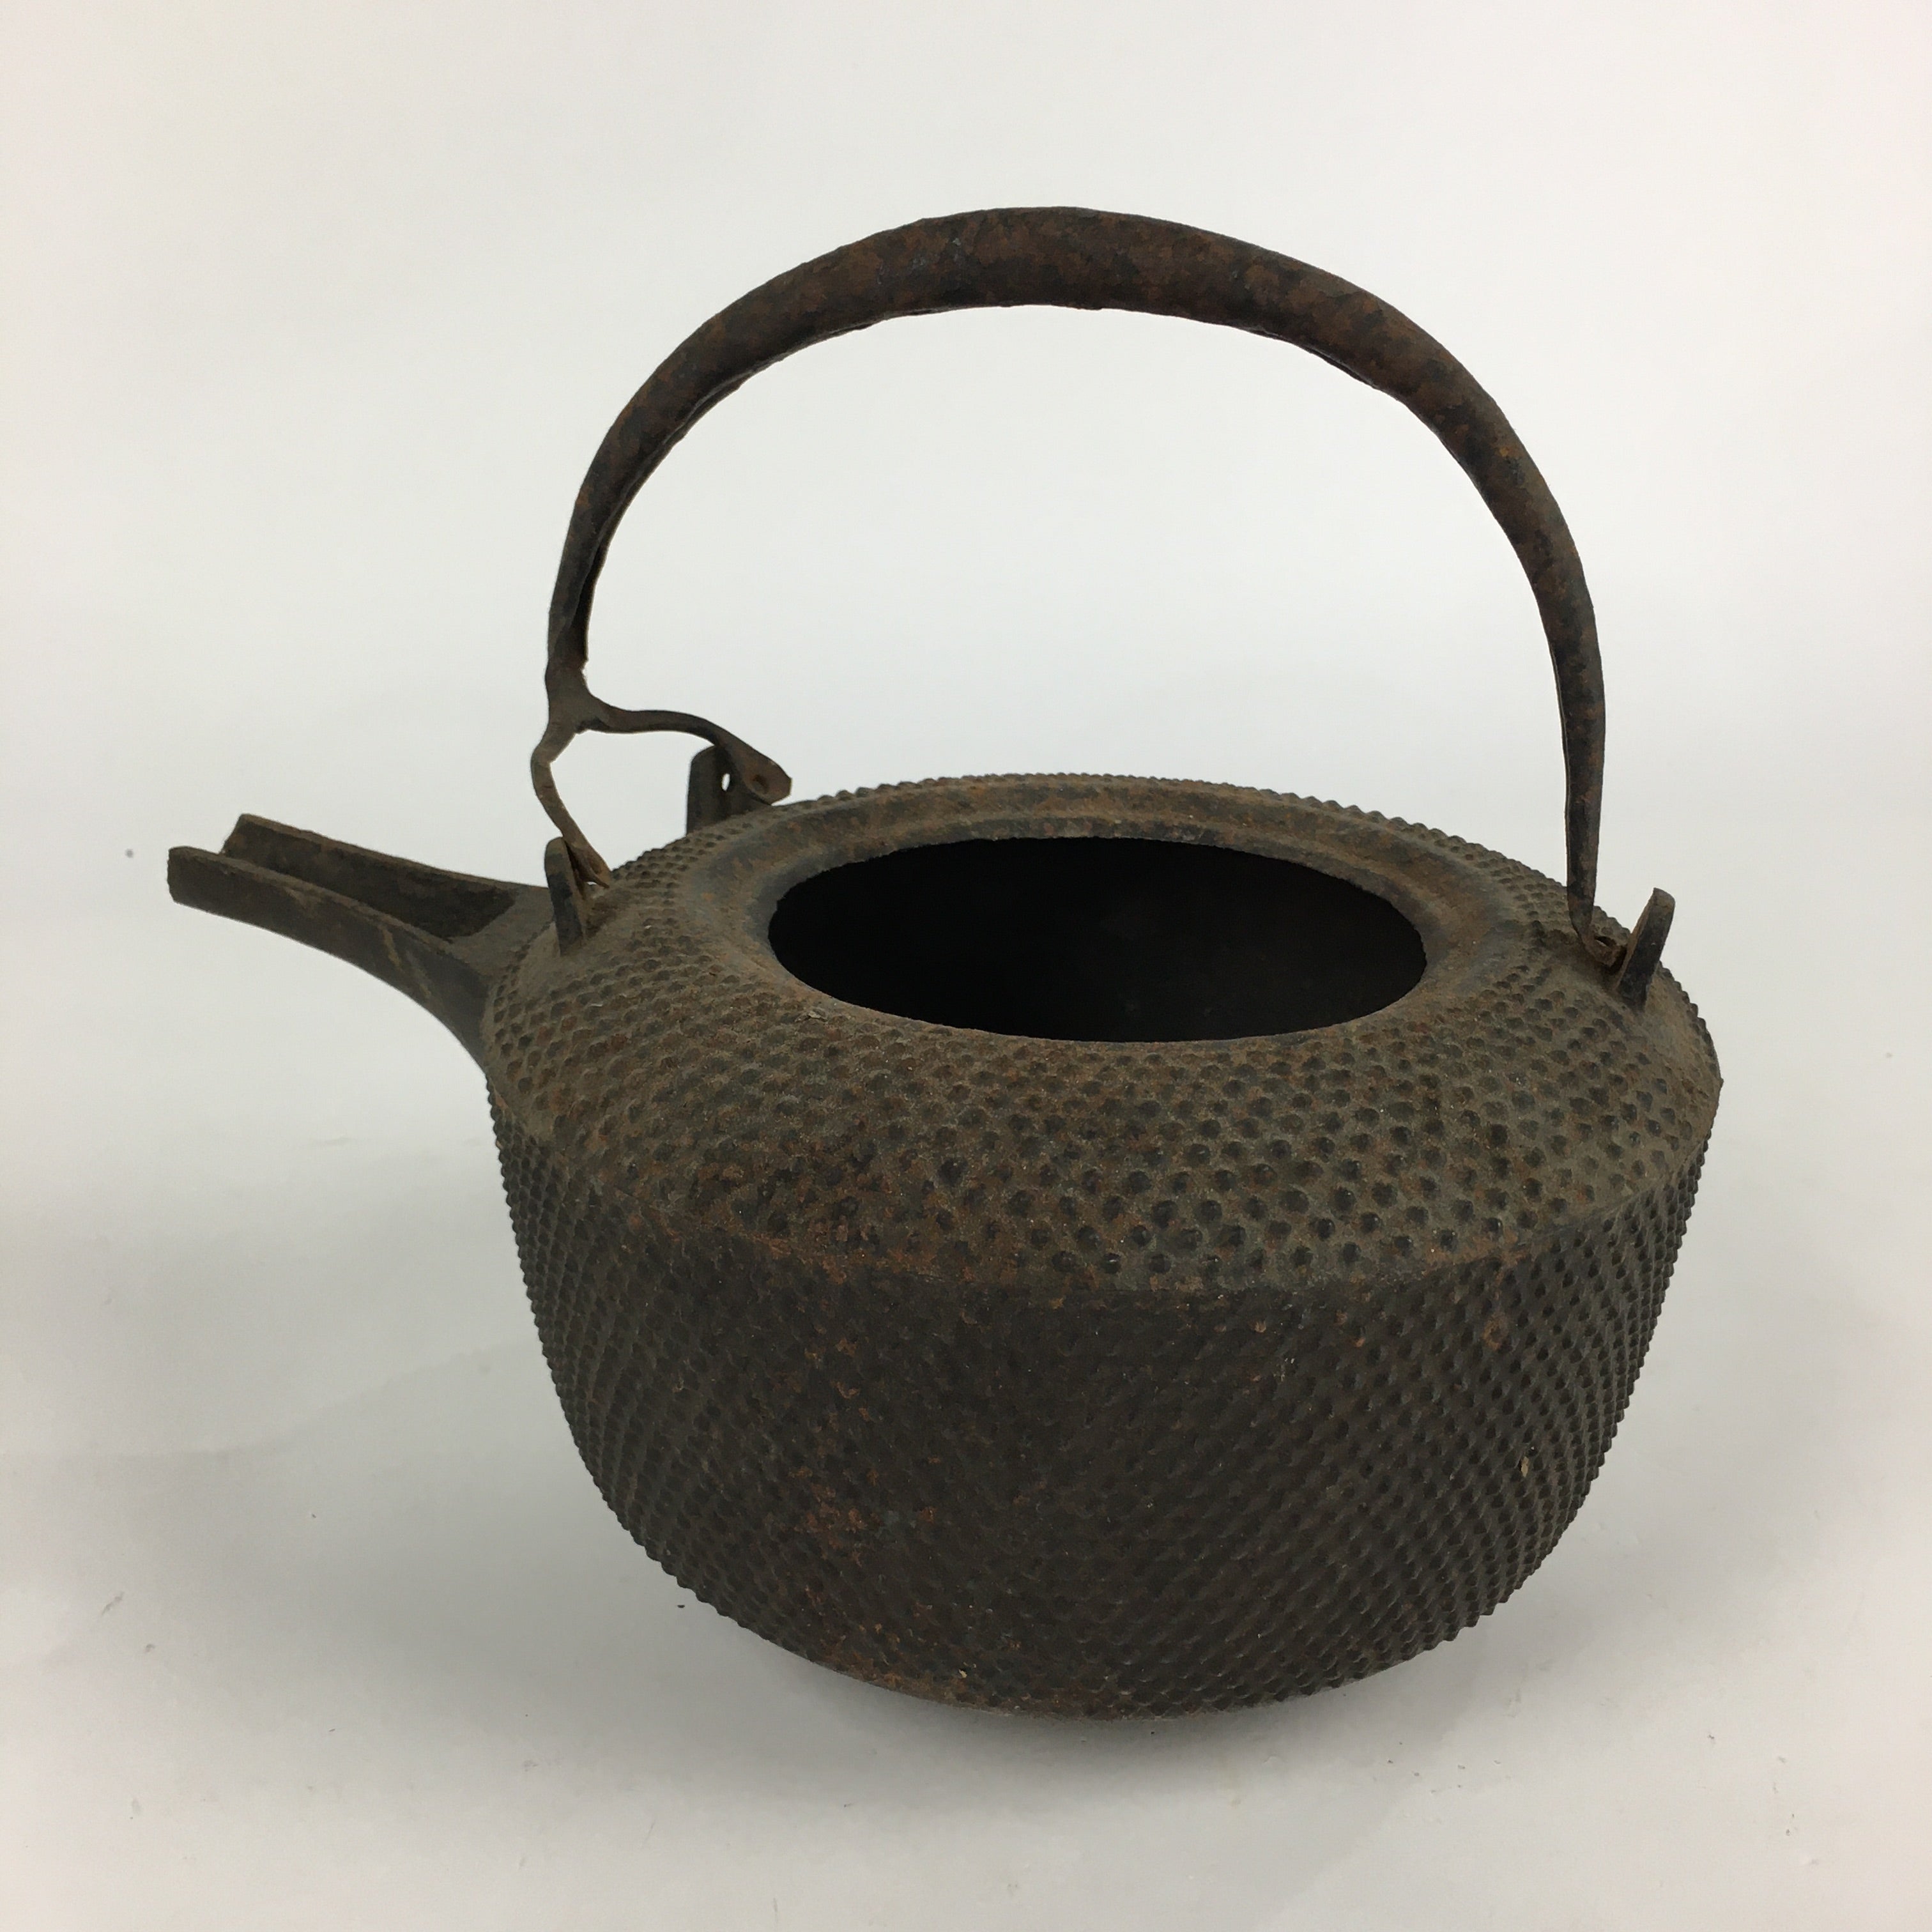 Antique Large Cast Iron Kettle With Handle